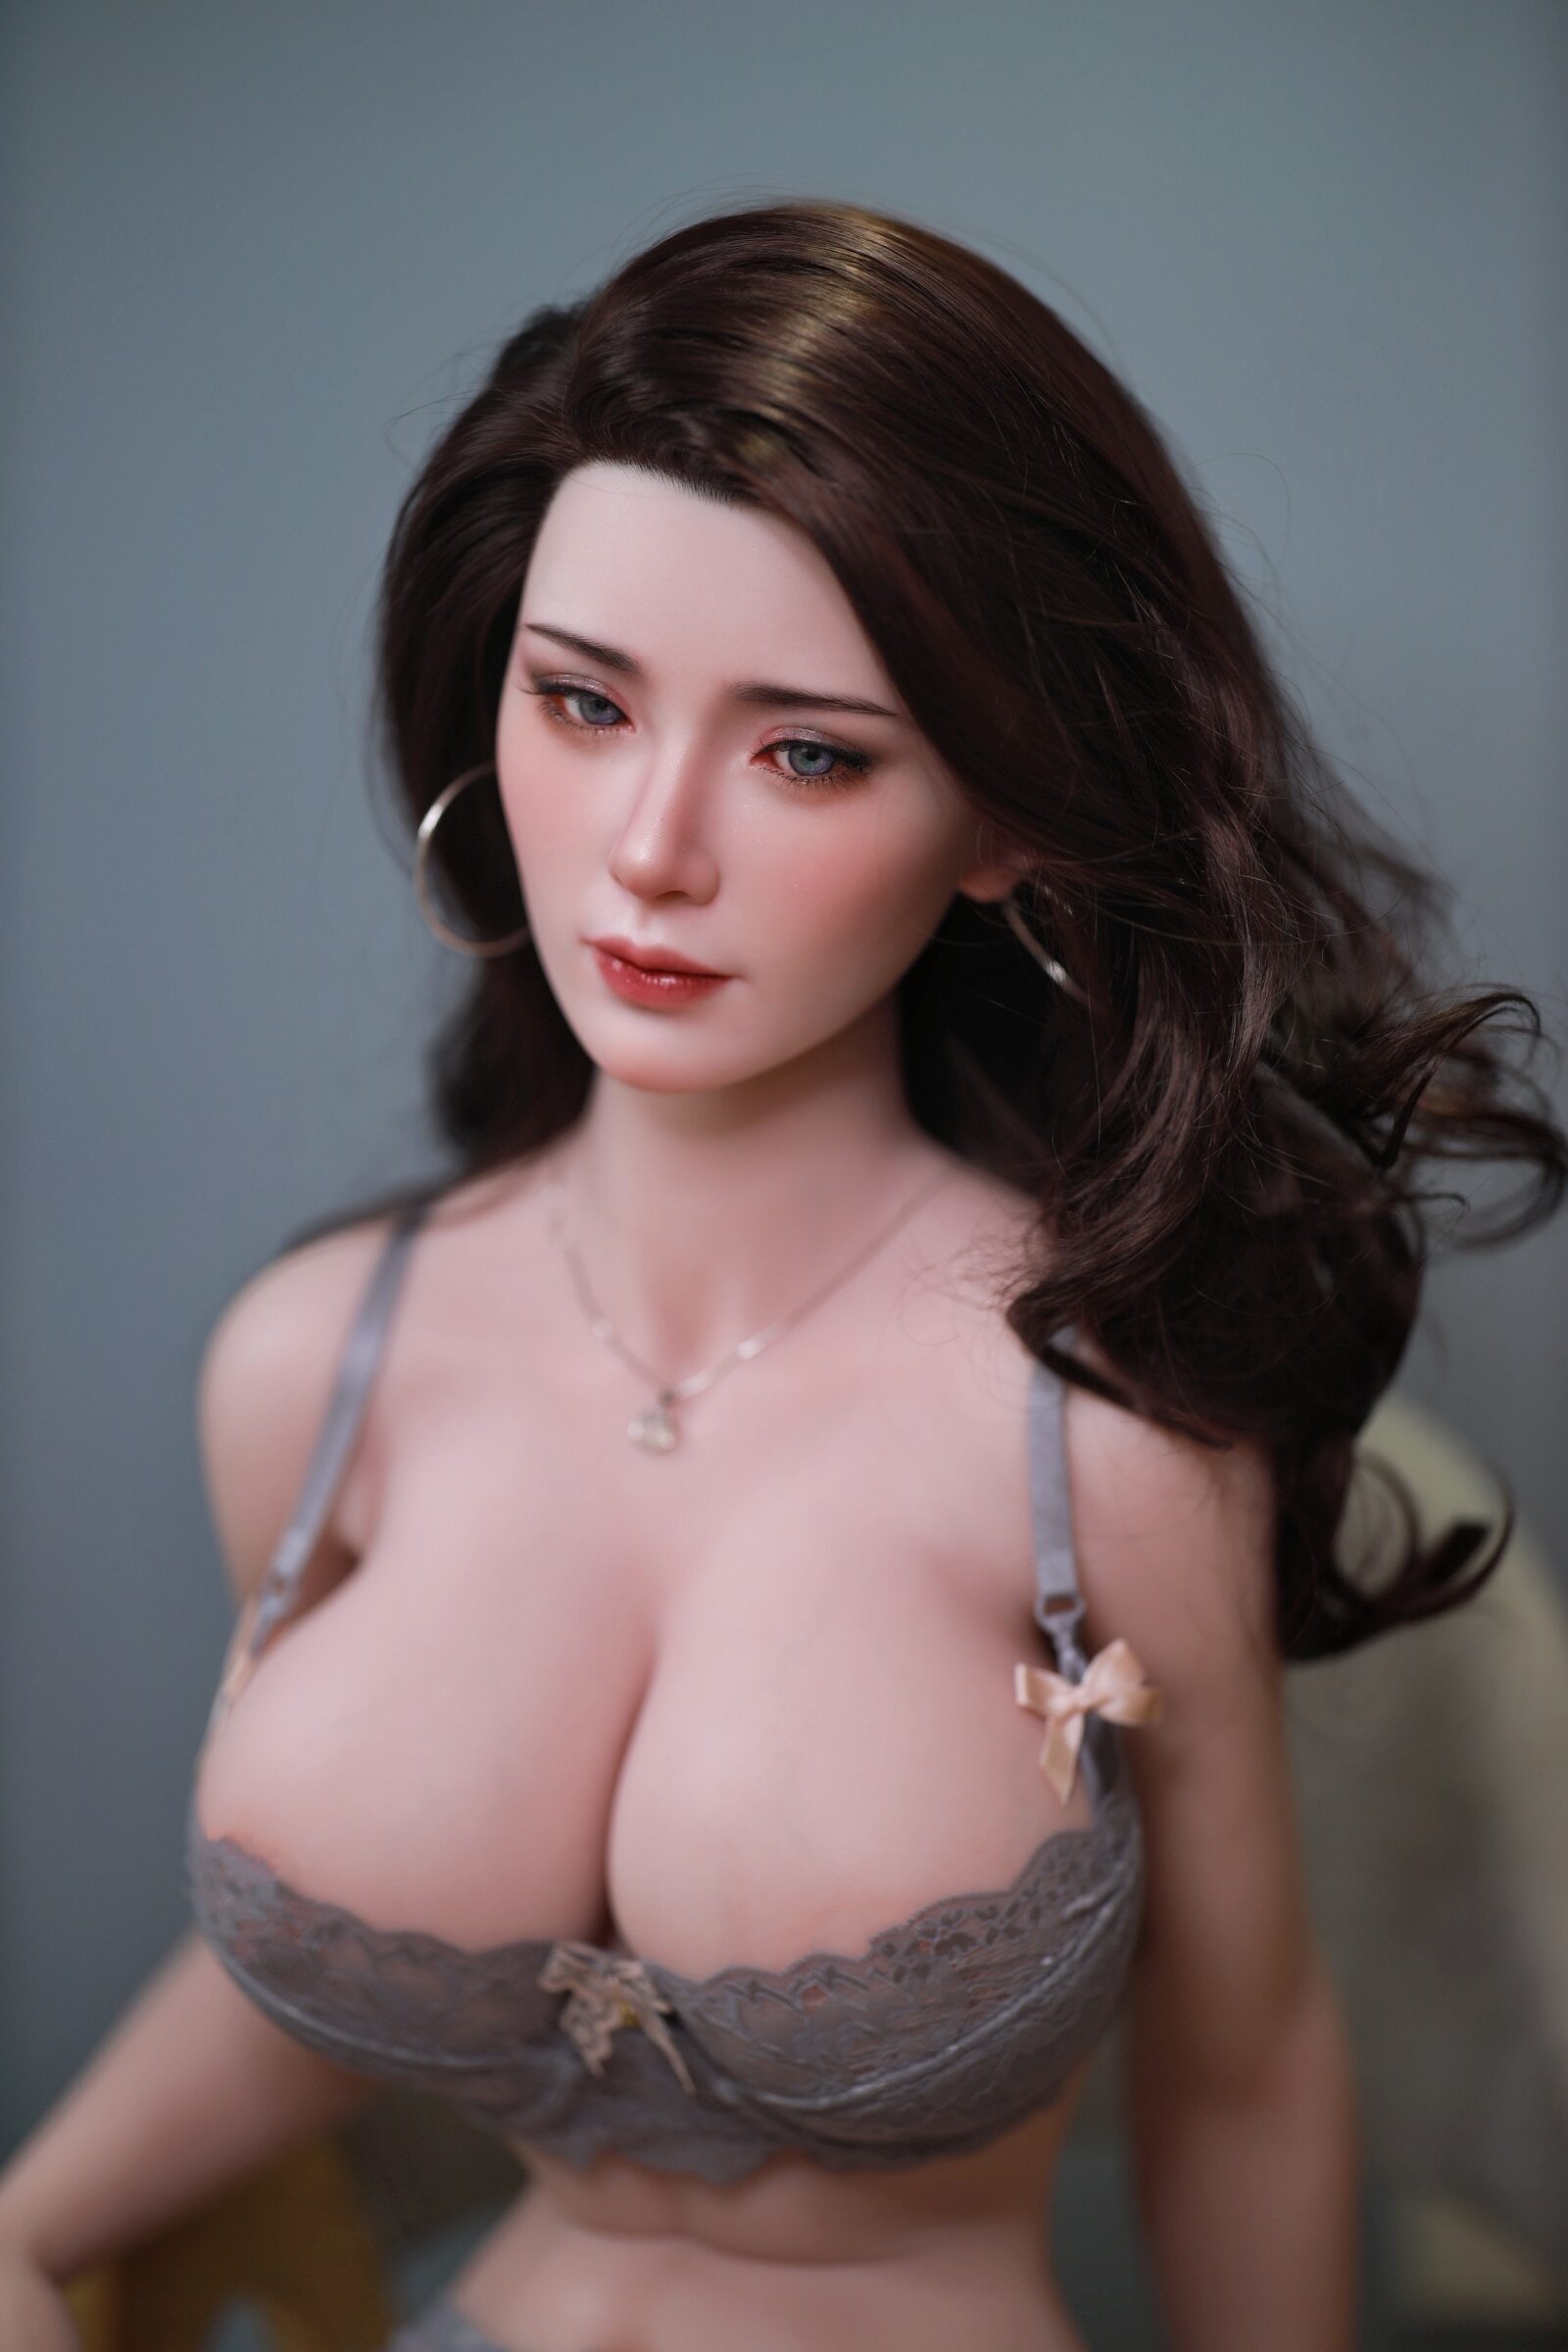 Full Silicone Doll for Male Huge Breasts Slim Body Realistic Vagina Pussy Anal Love dolls for Men Masturbator Love Dolls,Masturbator,Love Dolls,Adult sex dolls,Adult Dolls,Adult Love Dolls